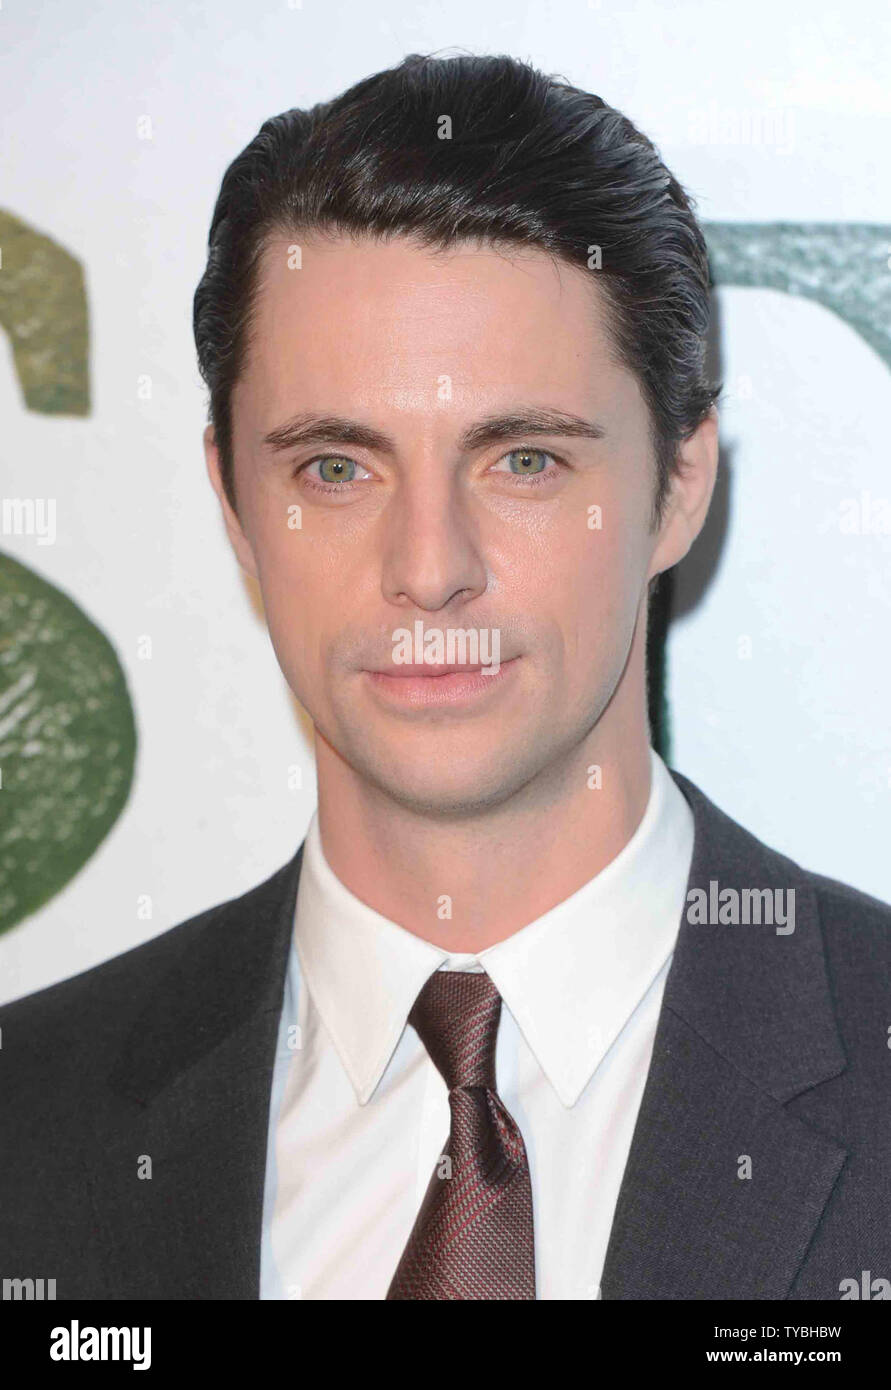 English actor Matthew Goode attends a special screening of 'Stoker' at The Curzon Soho in London on February 17, 2013.     UPI/Paul Treadway Stock Photo